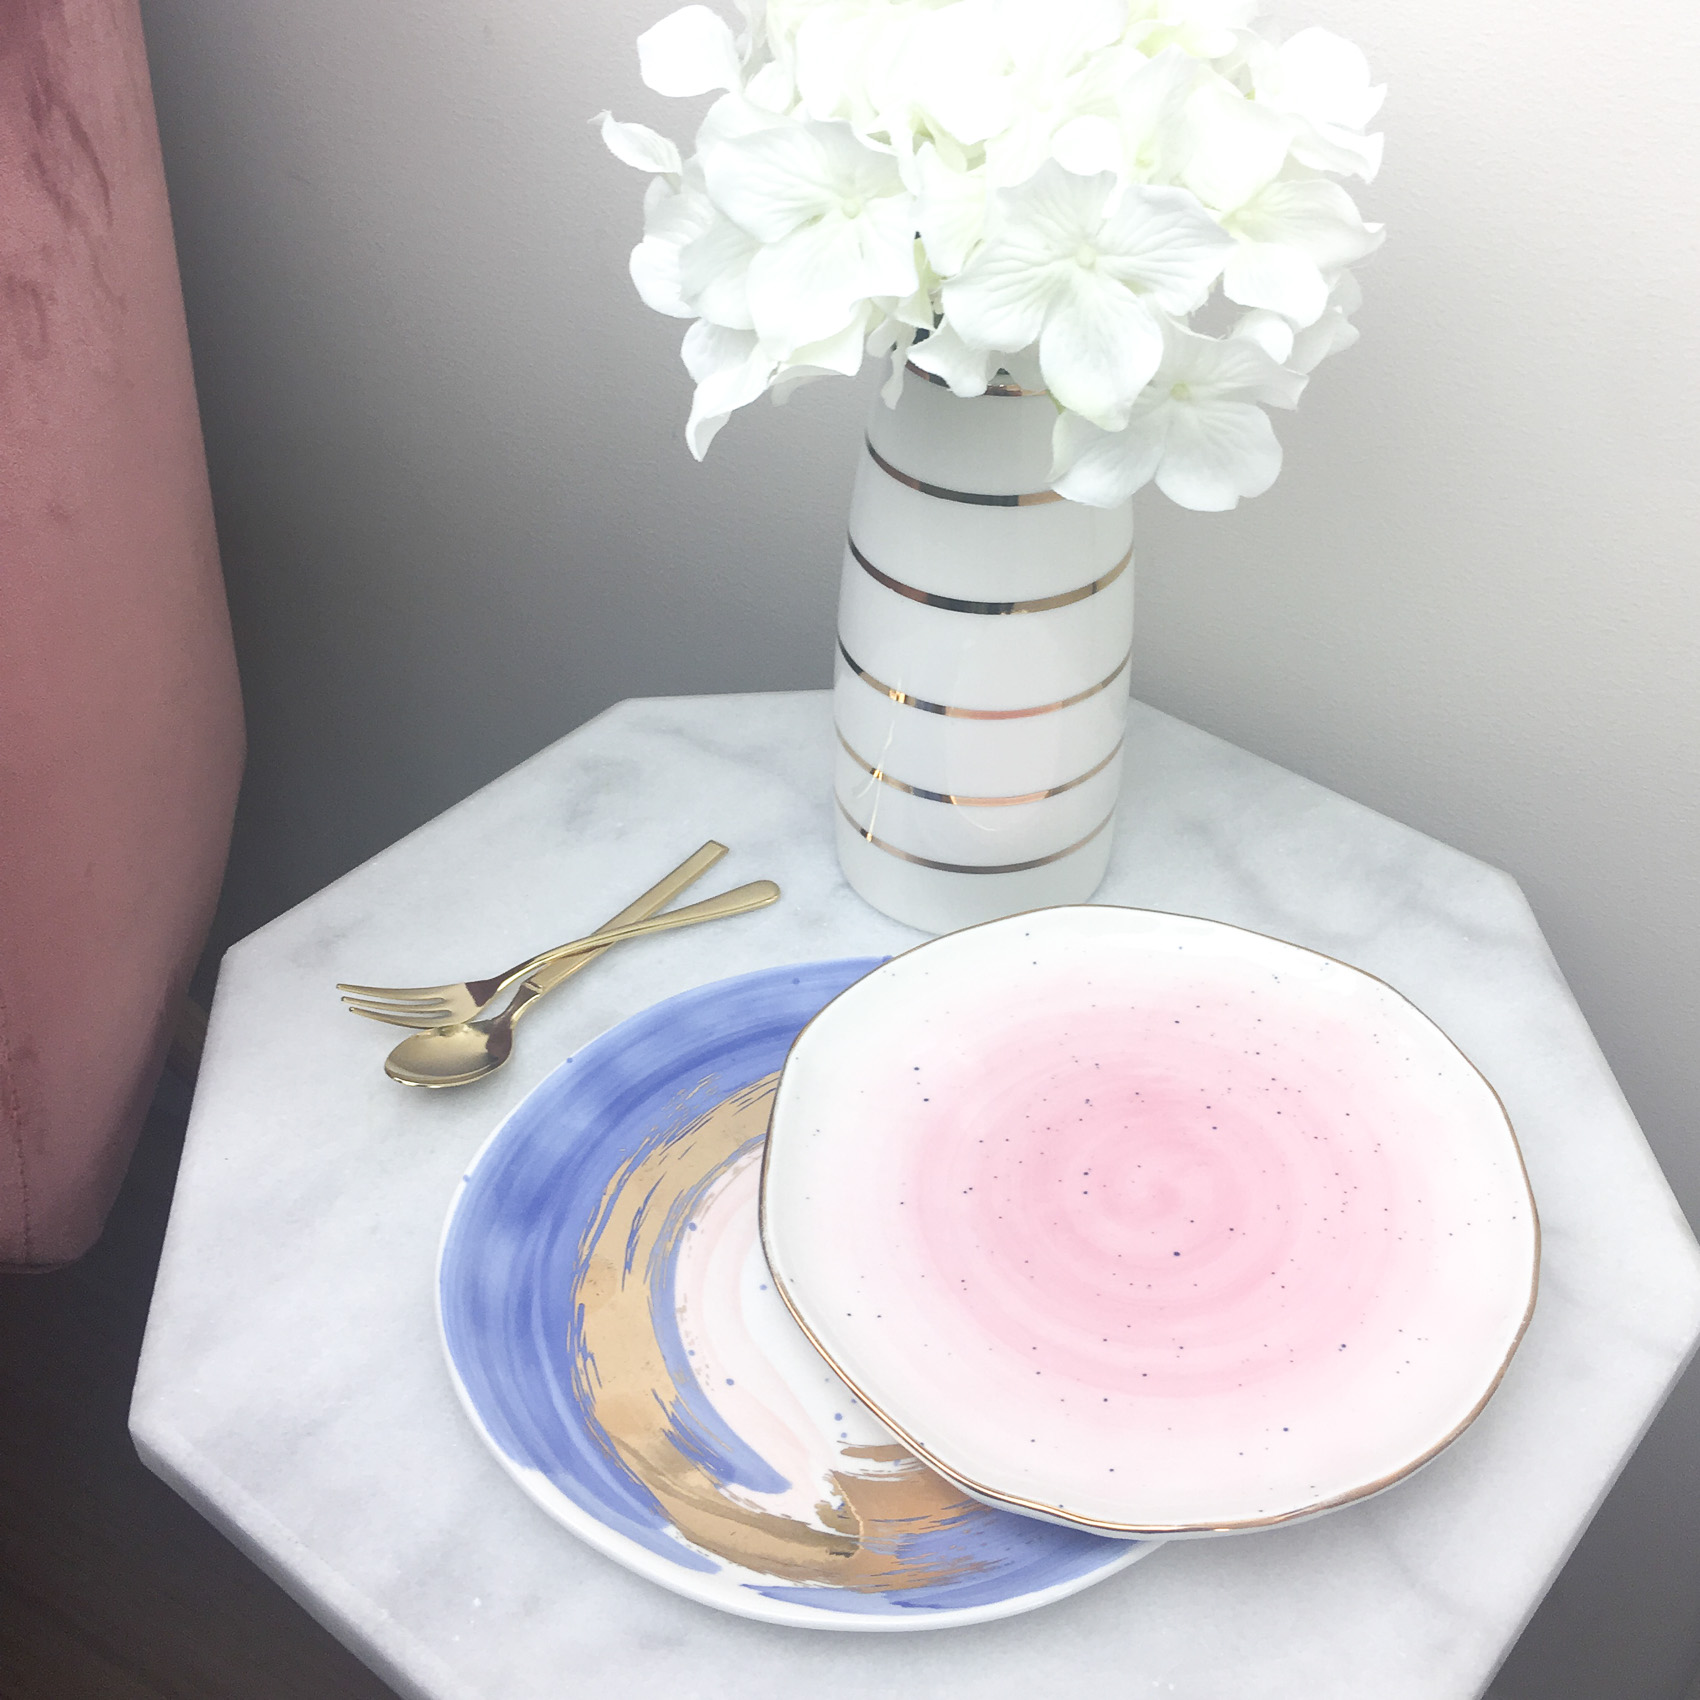 Anthropologie Mimira canape plate,gold cutlery, marble table.jpg